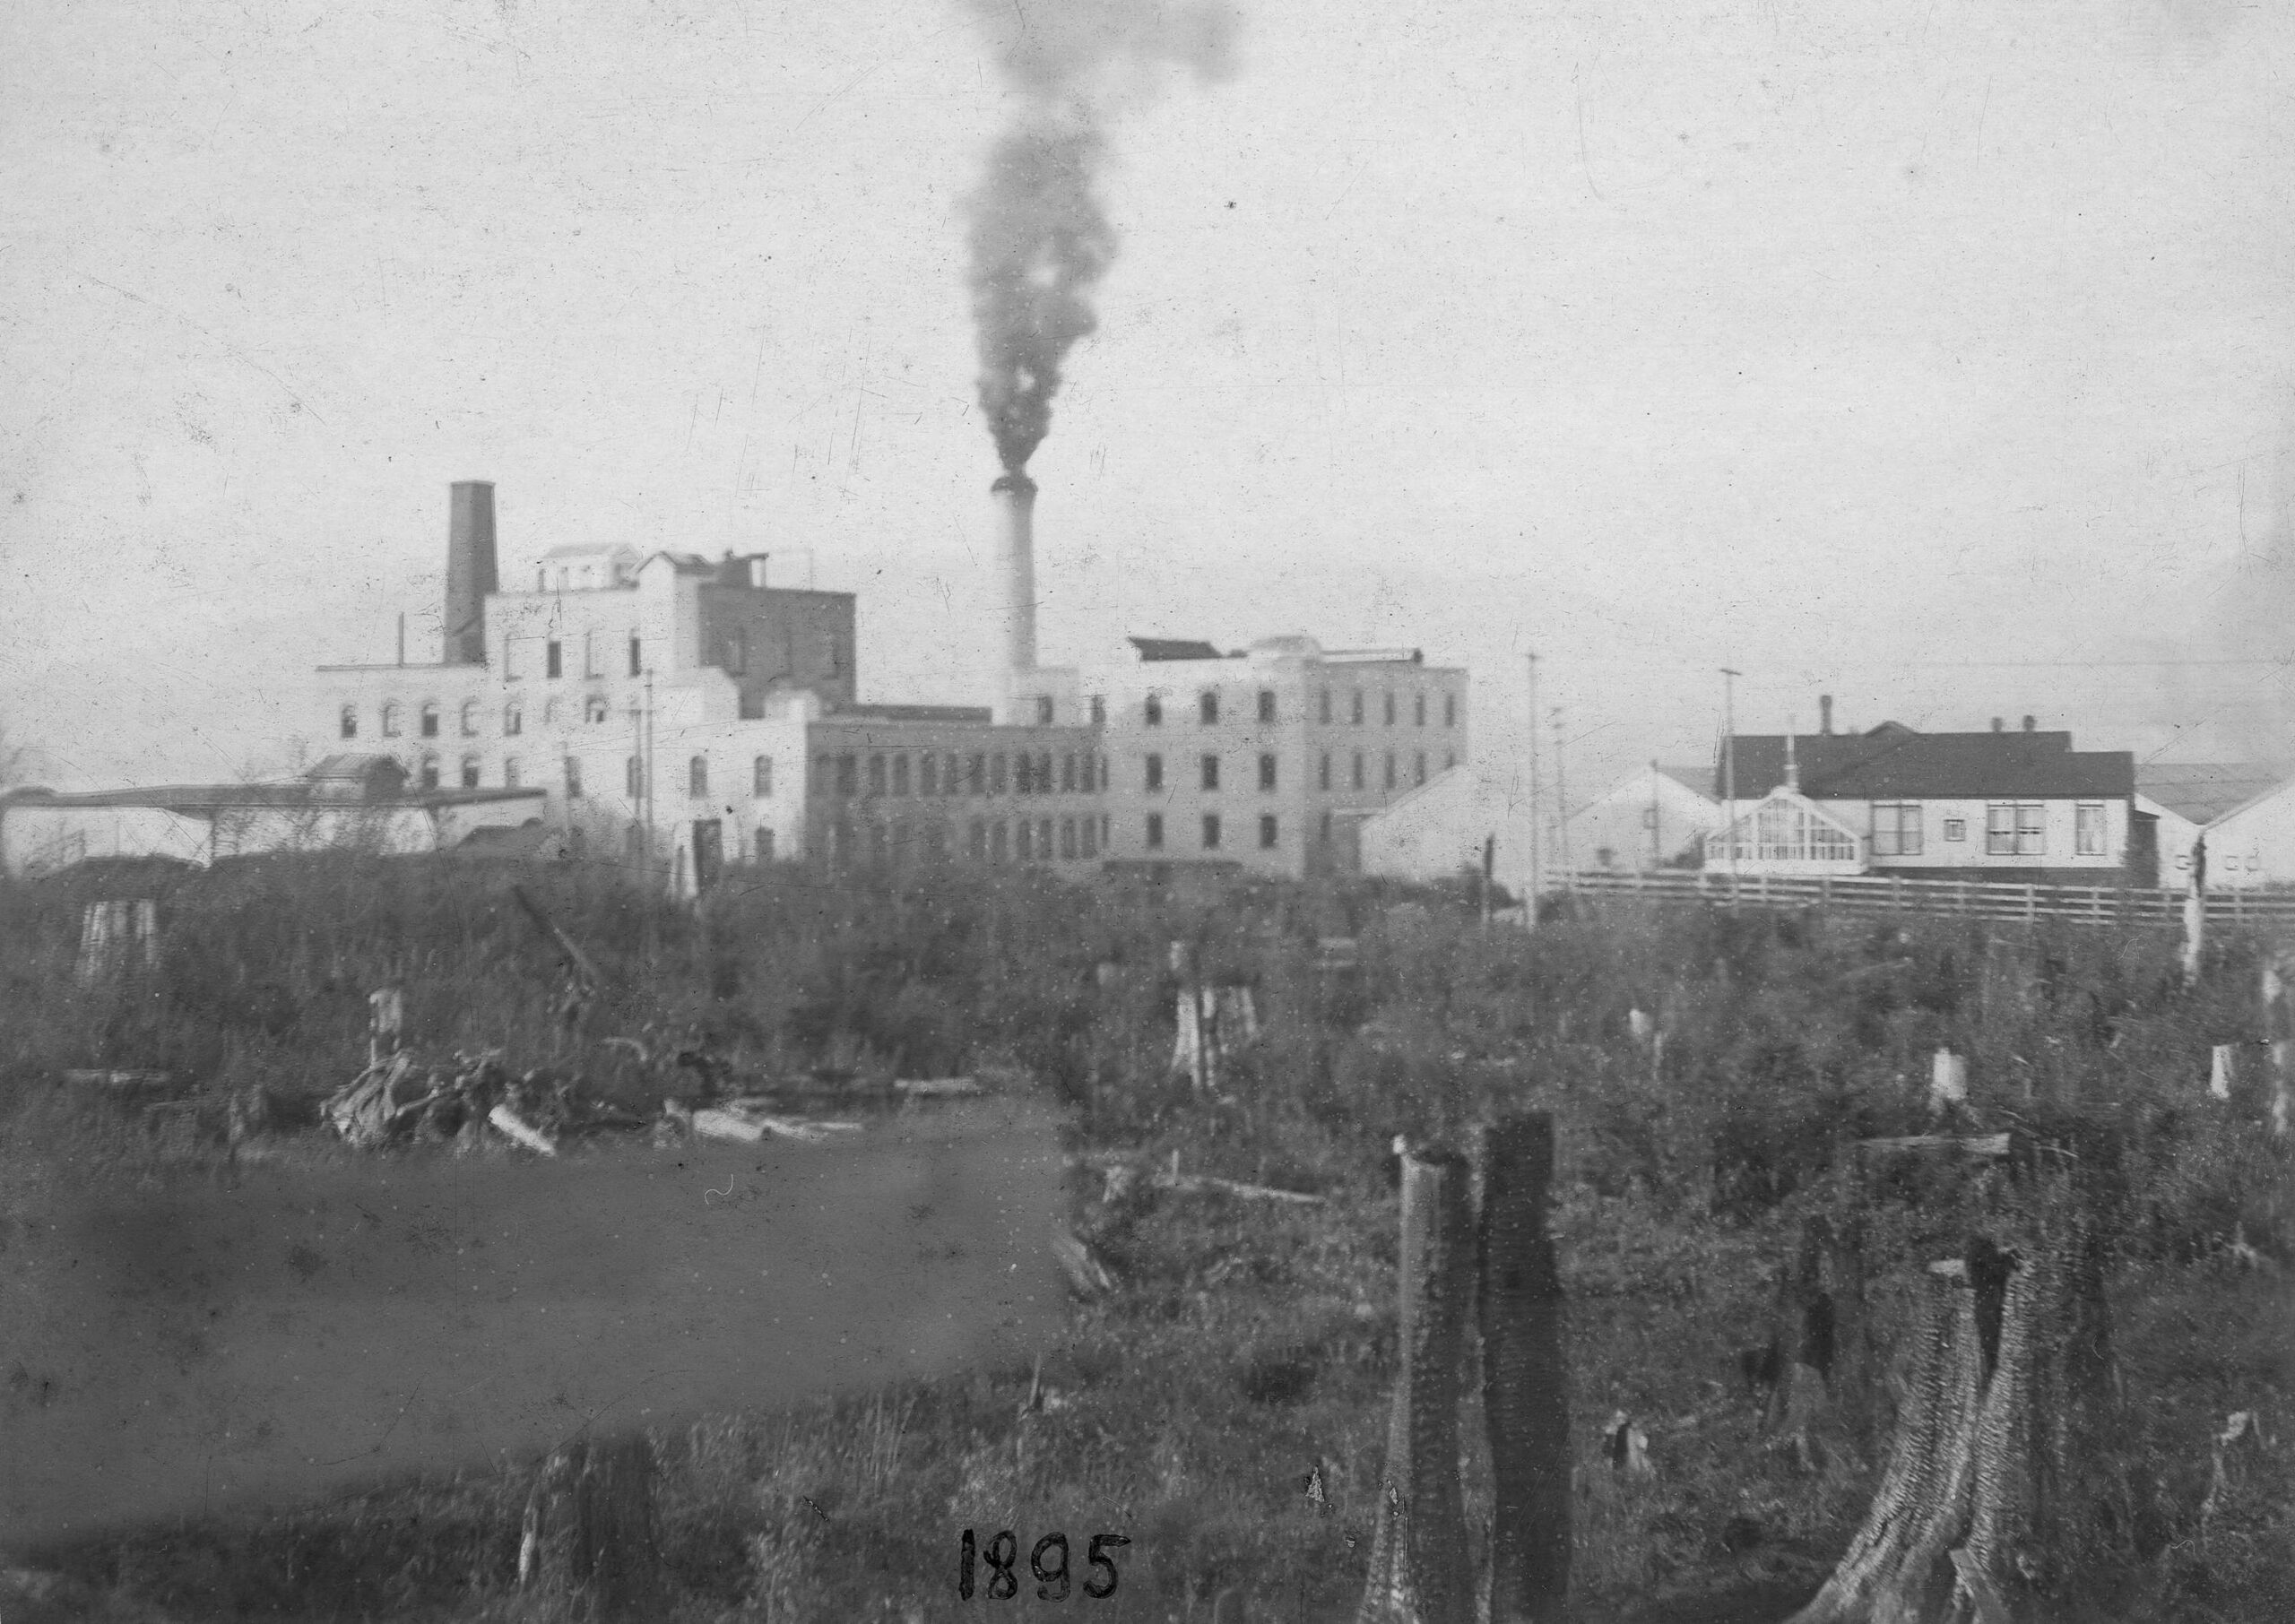 Vancouver Wants Foreshore Rights Adjacent to BC Sugar – October 31, 1898